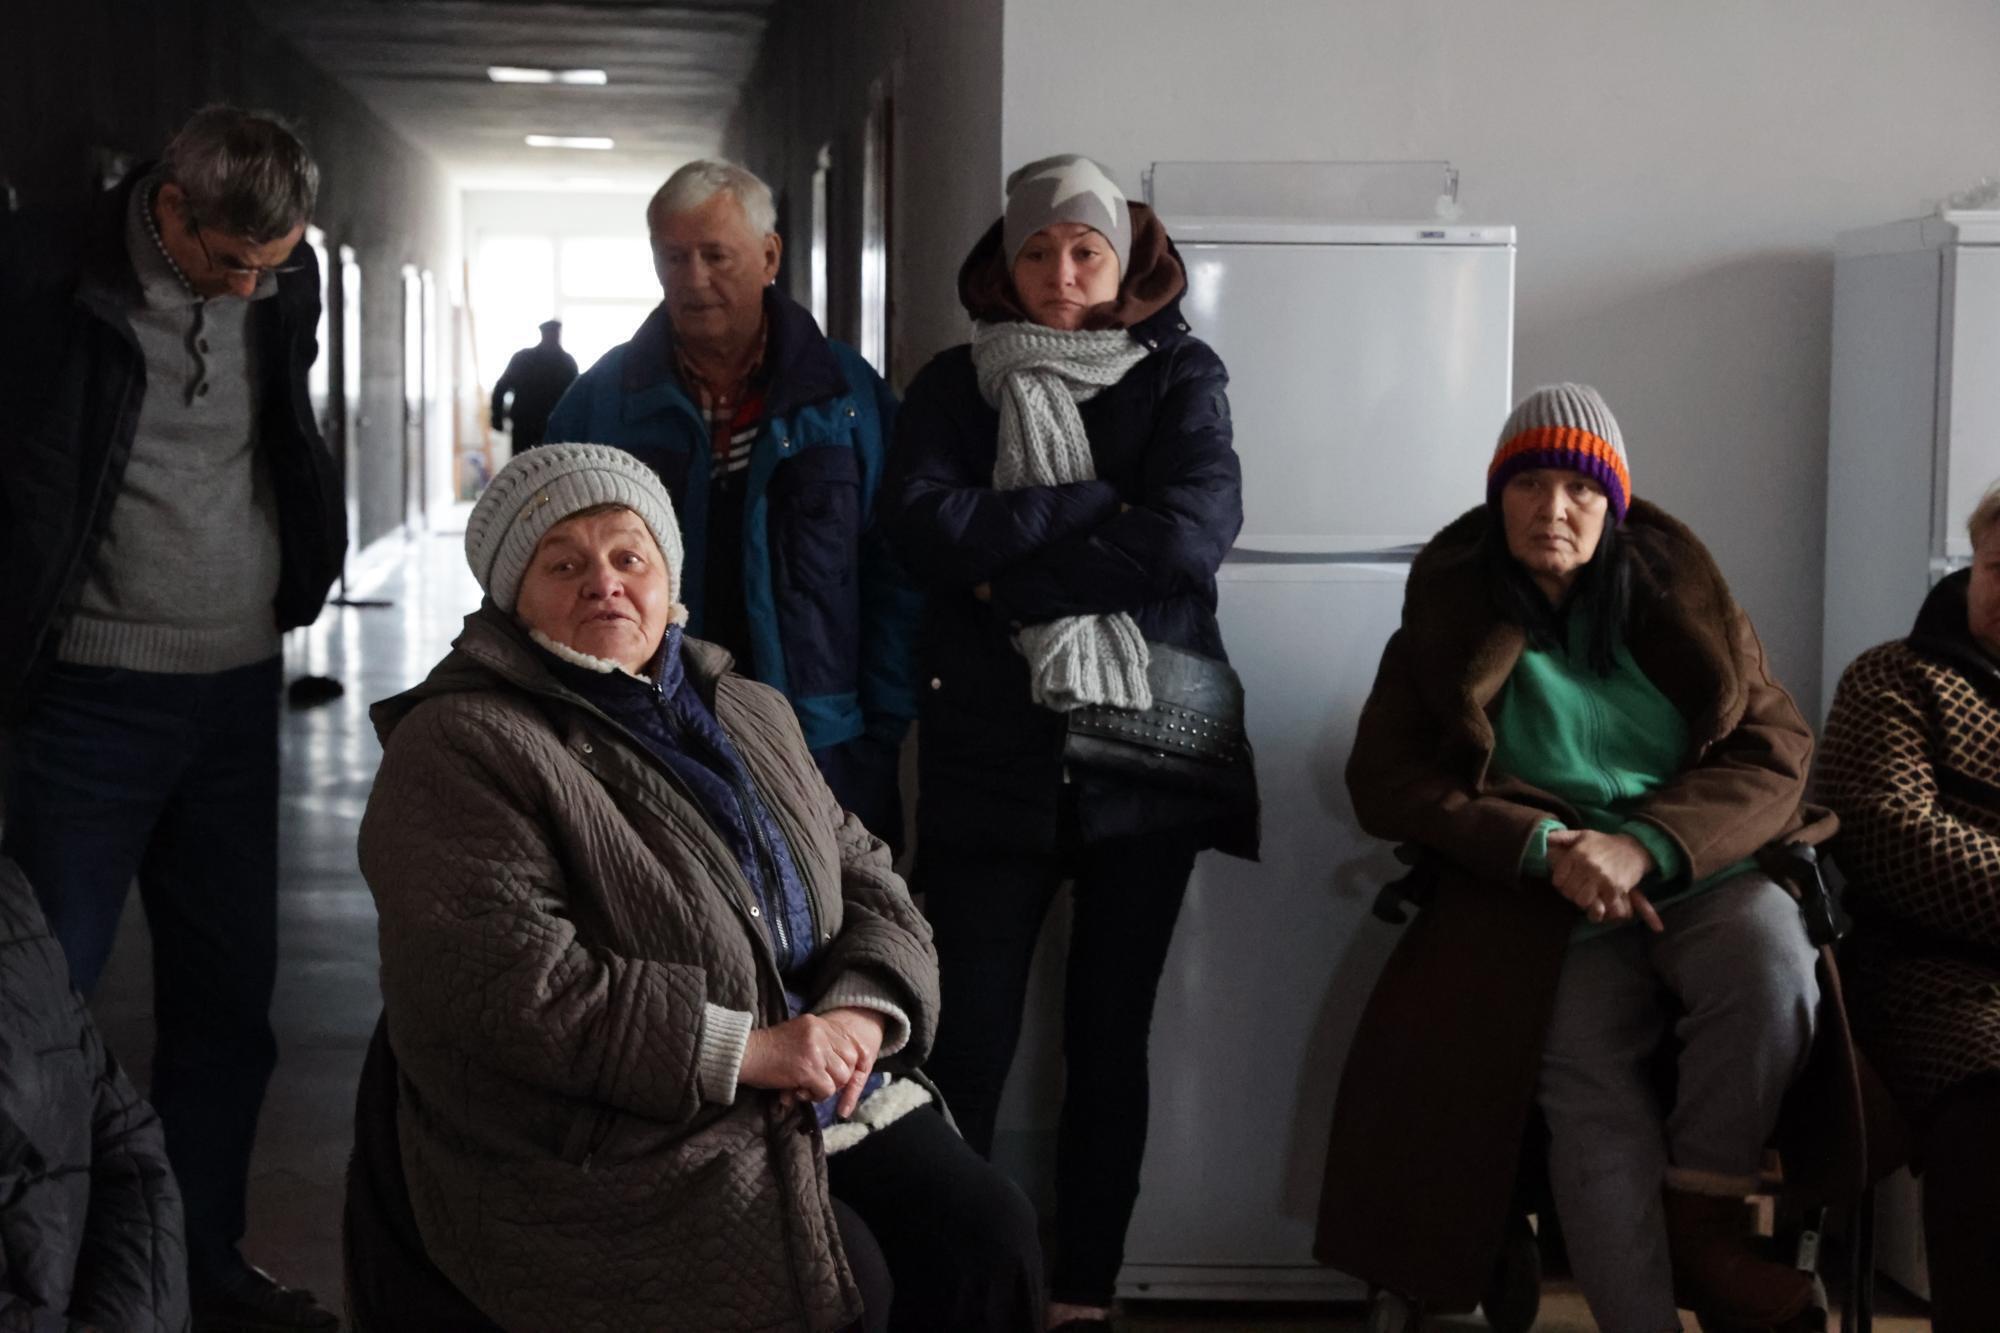 A group of people in a shelter